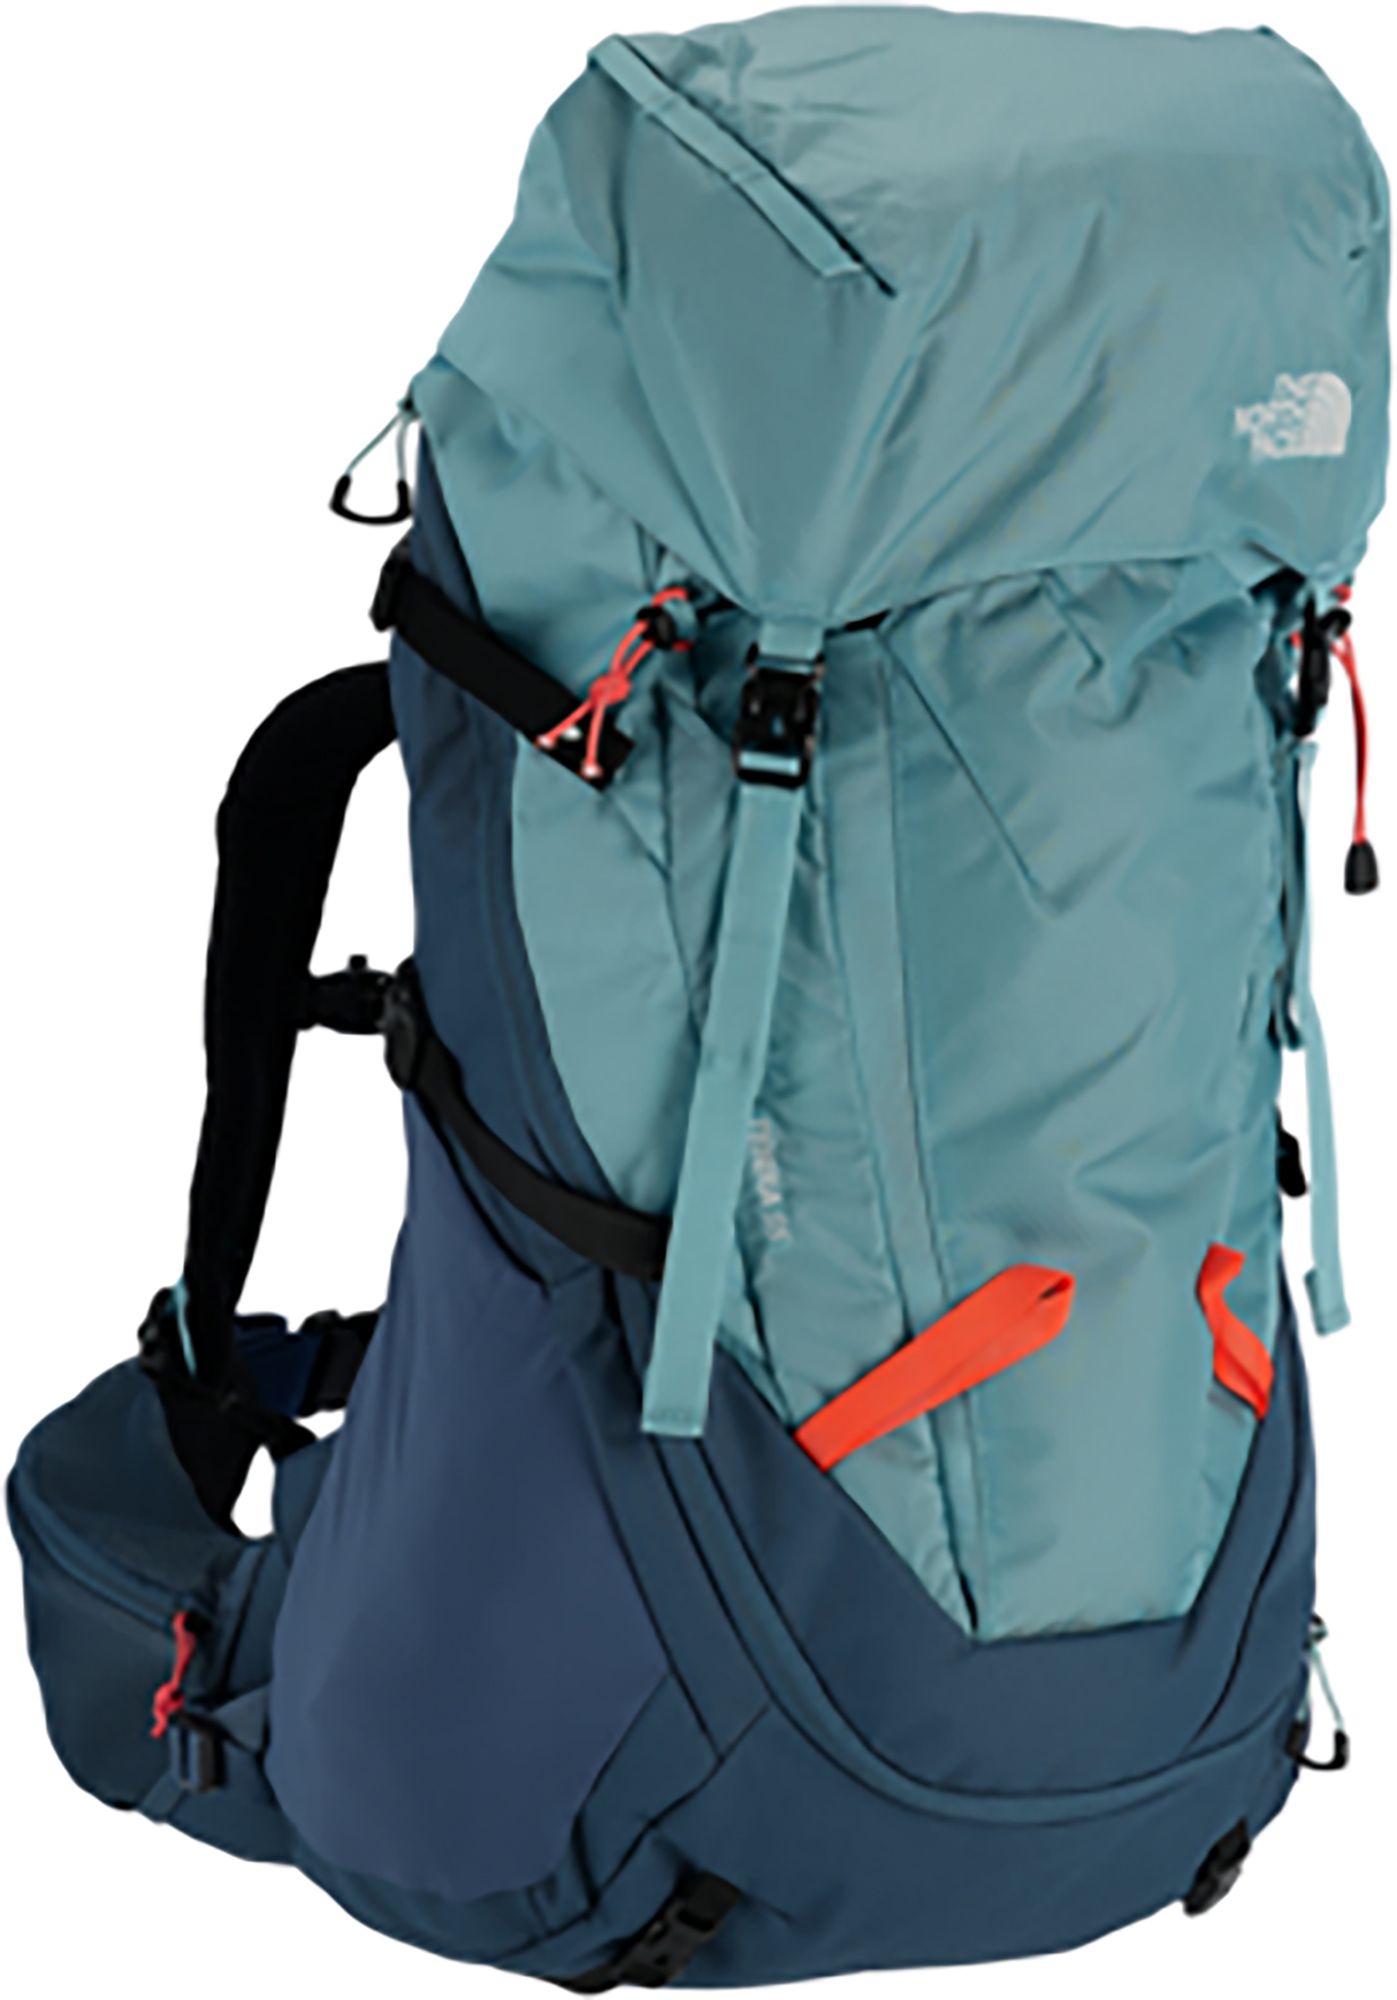 Photos - Knife / Multitool The North Face Women's Terra 55 Pack, Medium/Large, Reef Waters/Shady Blue 